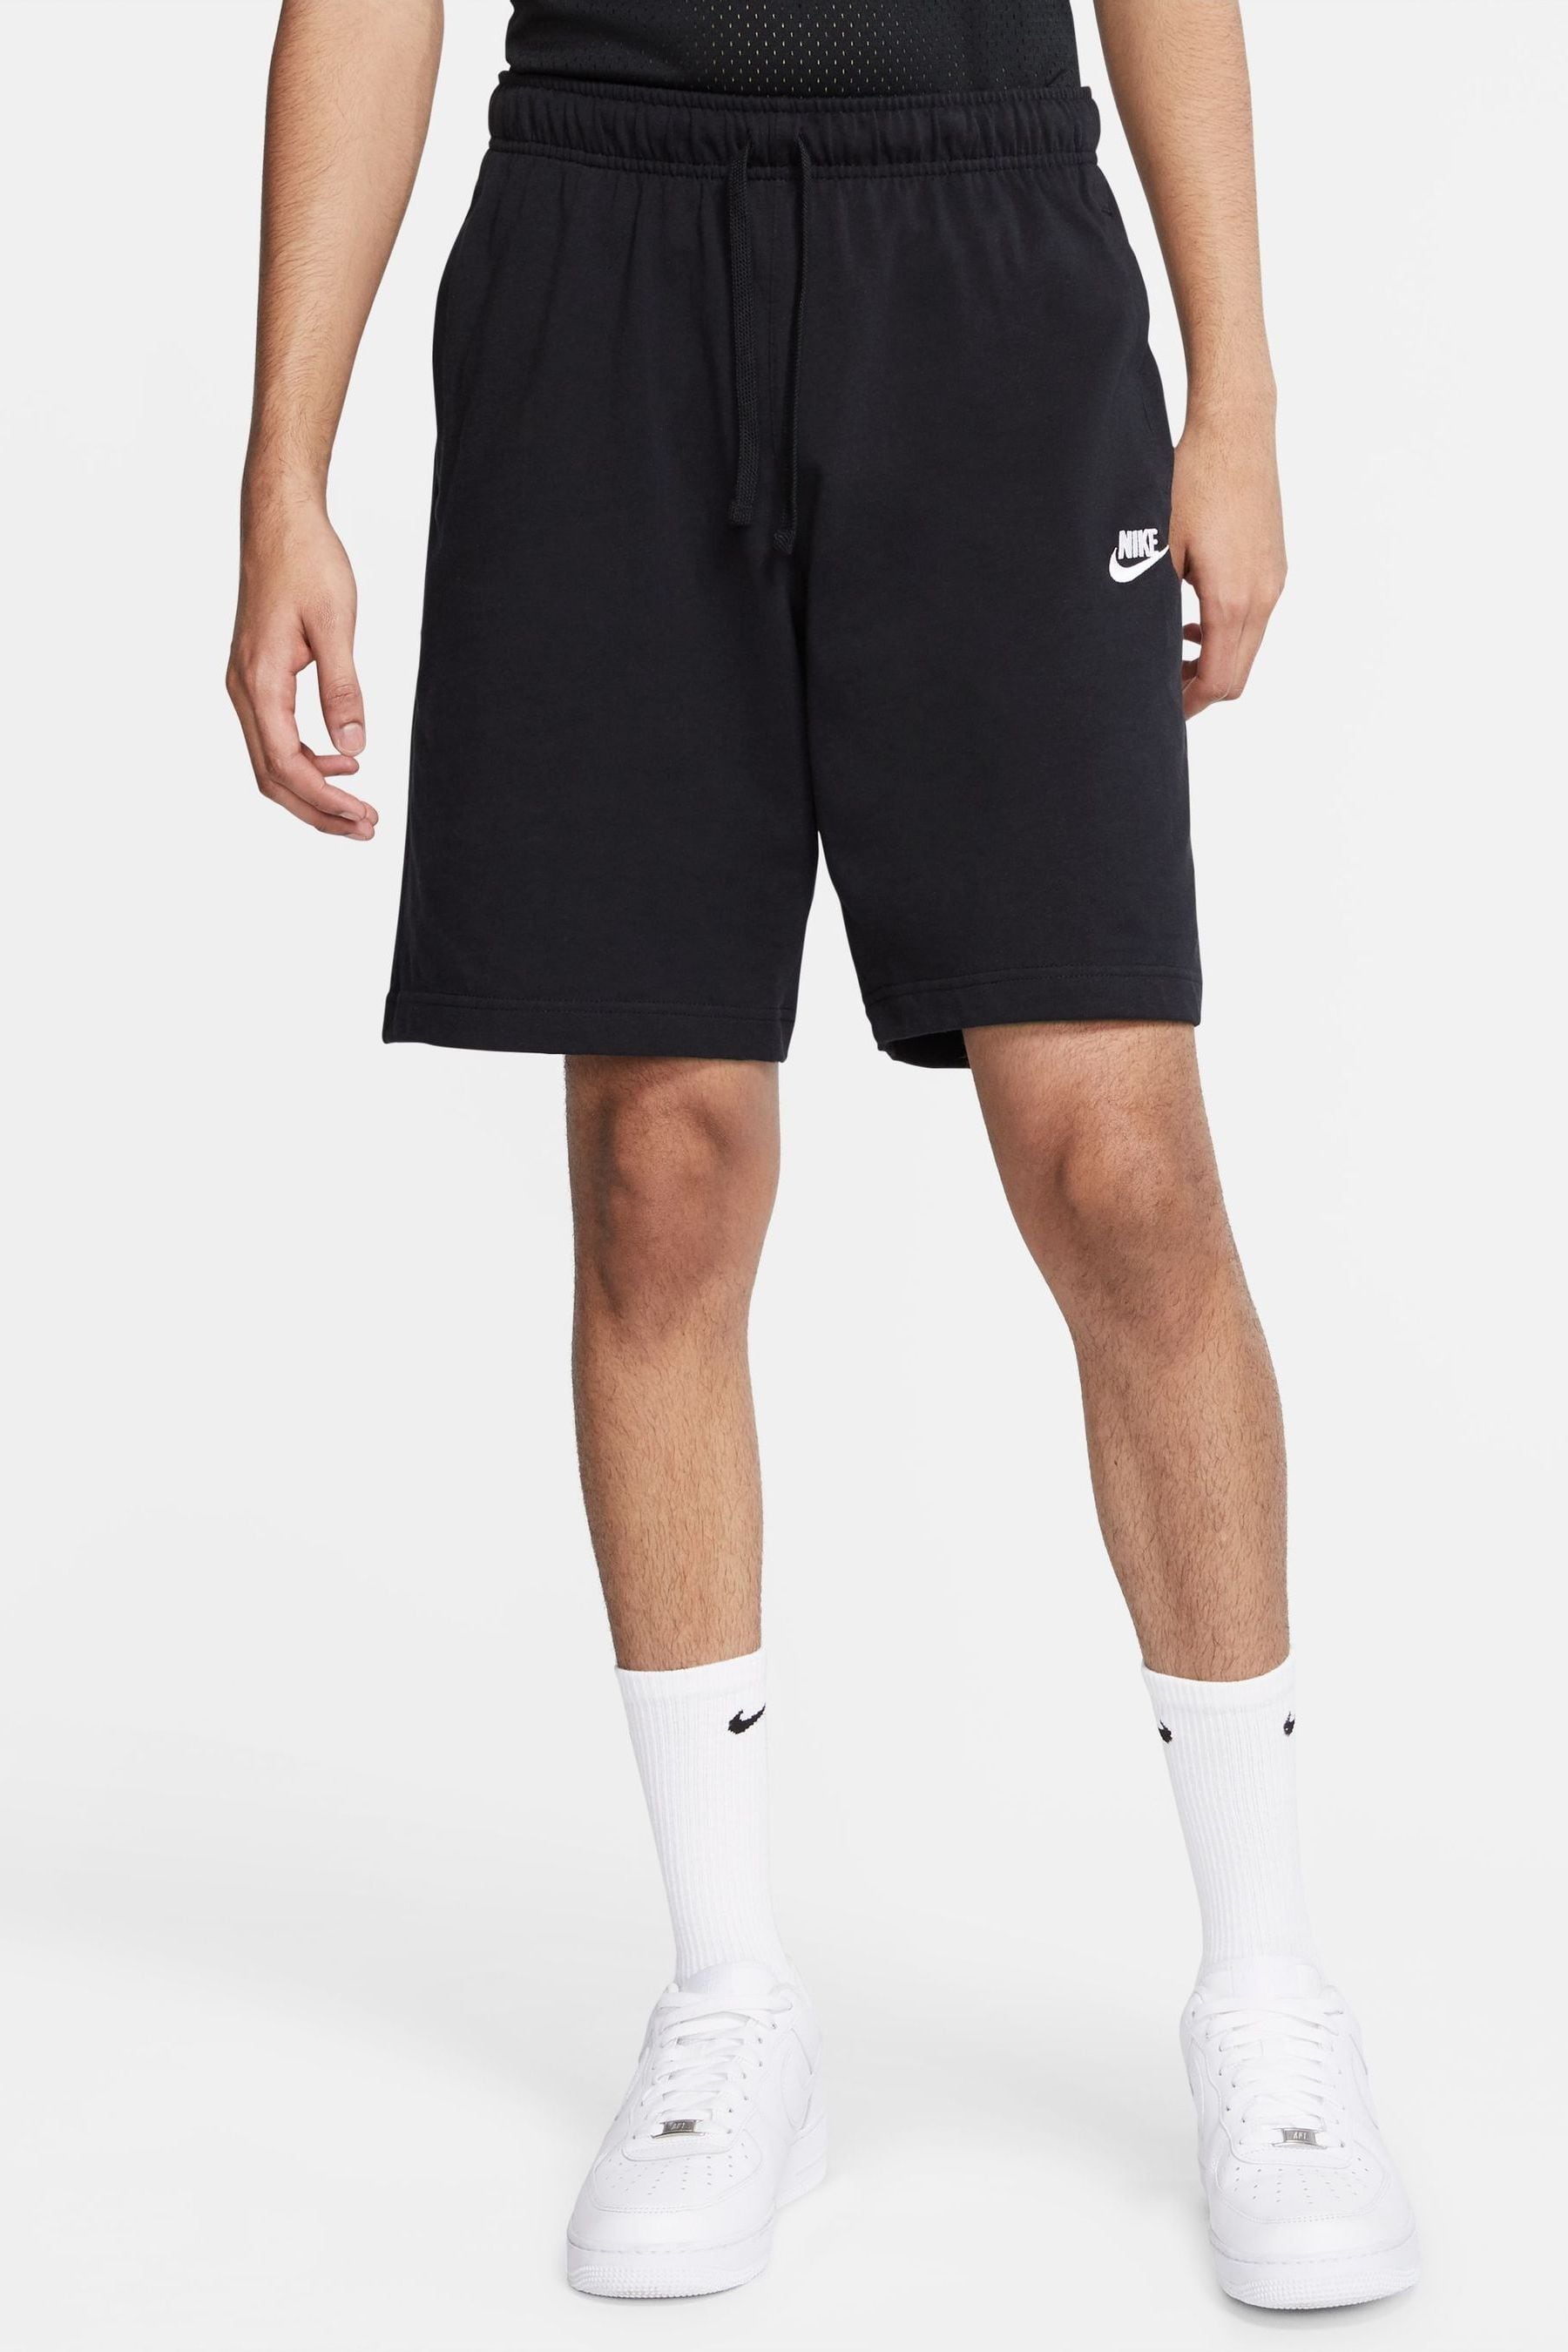 Buy Nike Black Club Shorts from the Next UK online shop